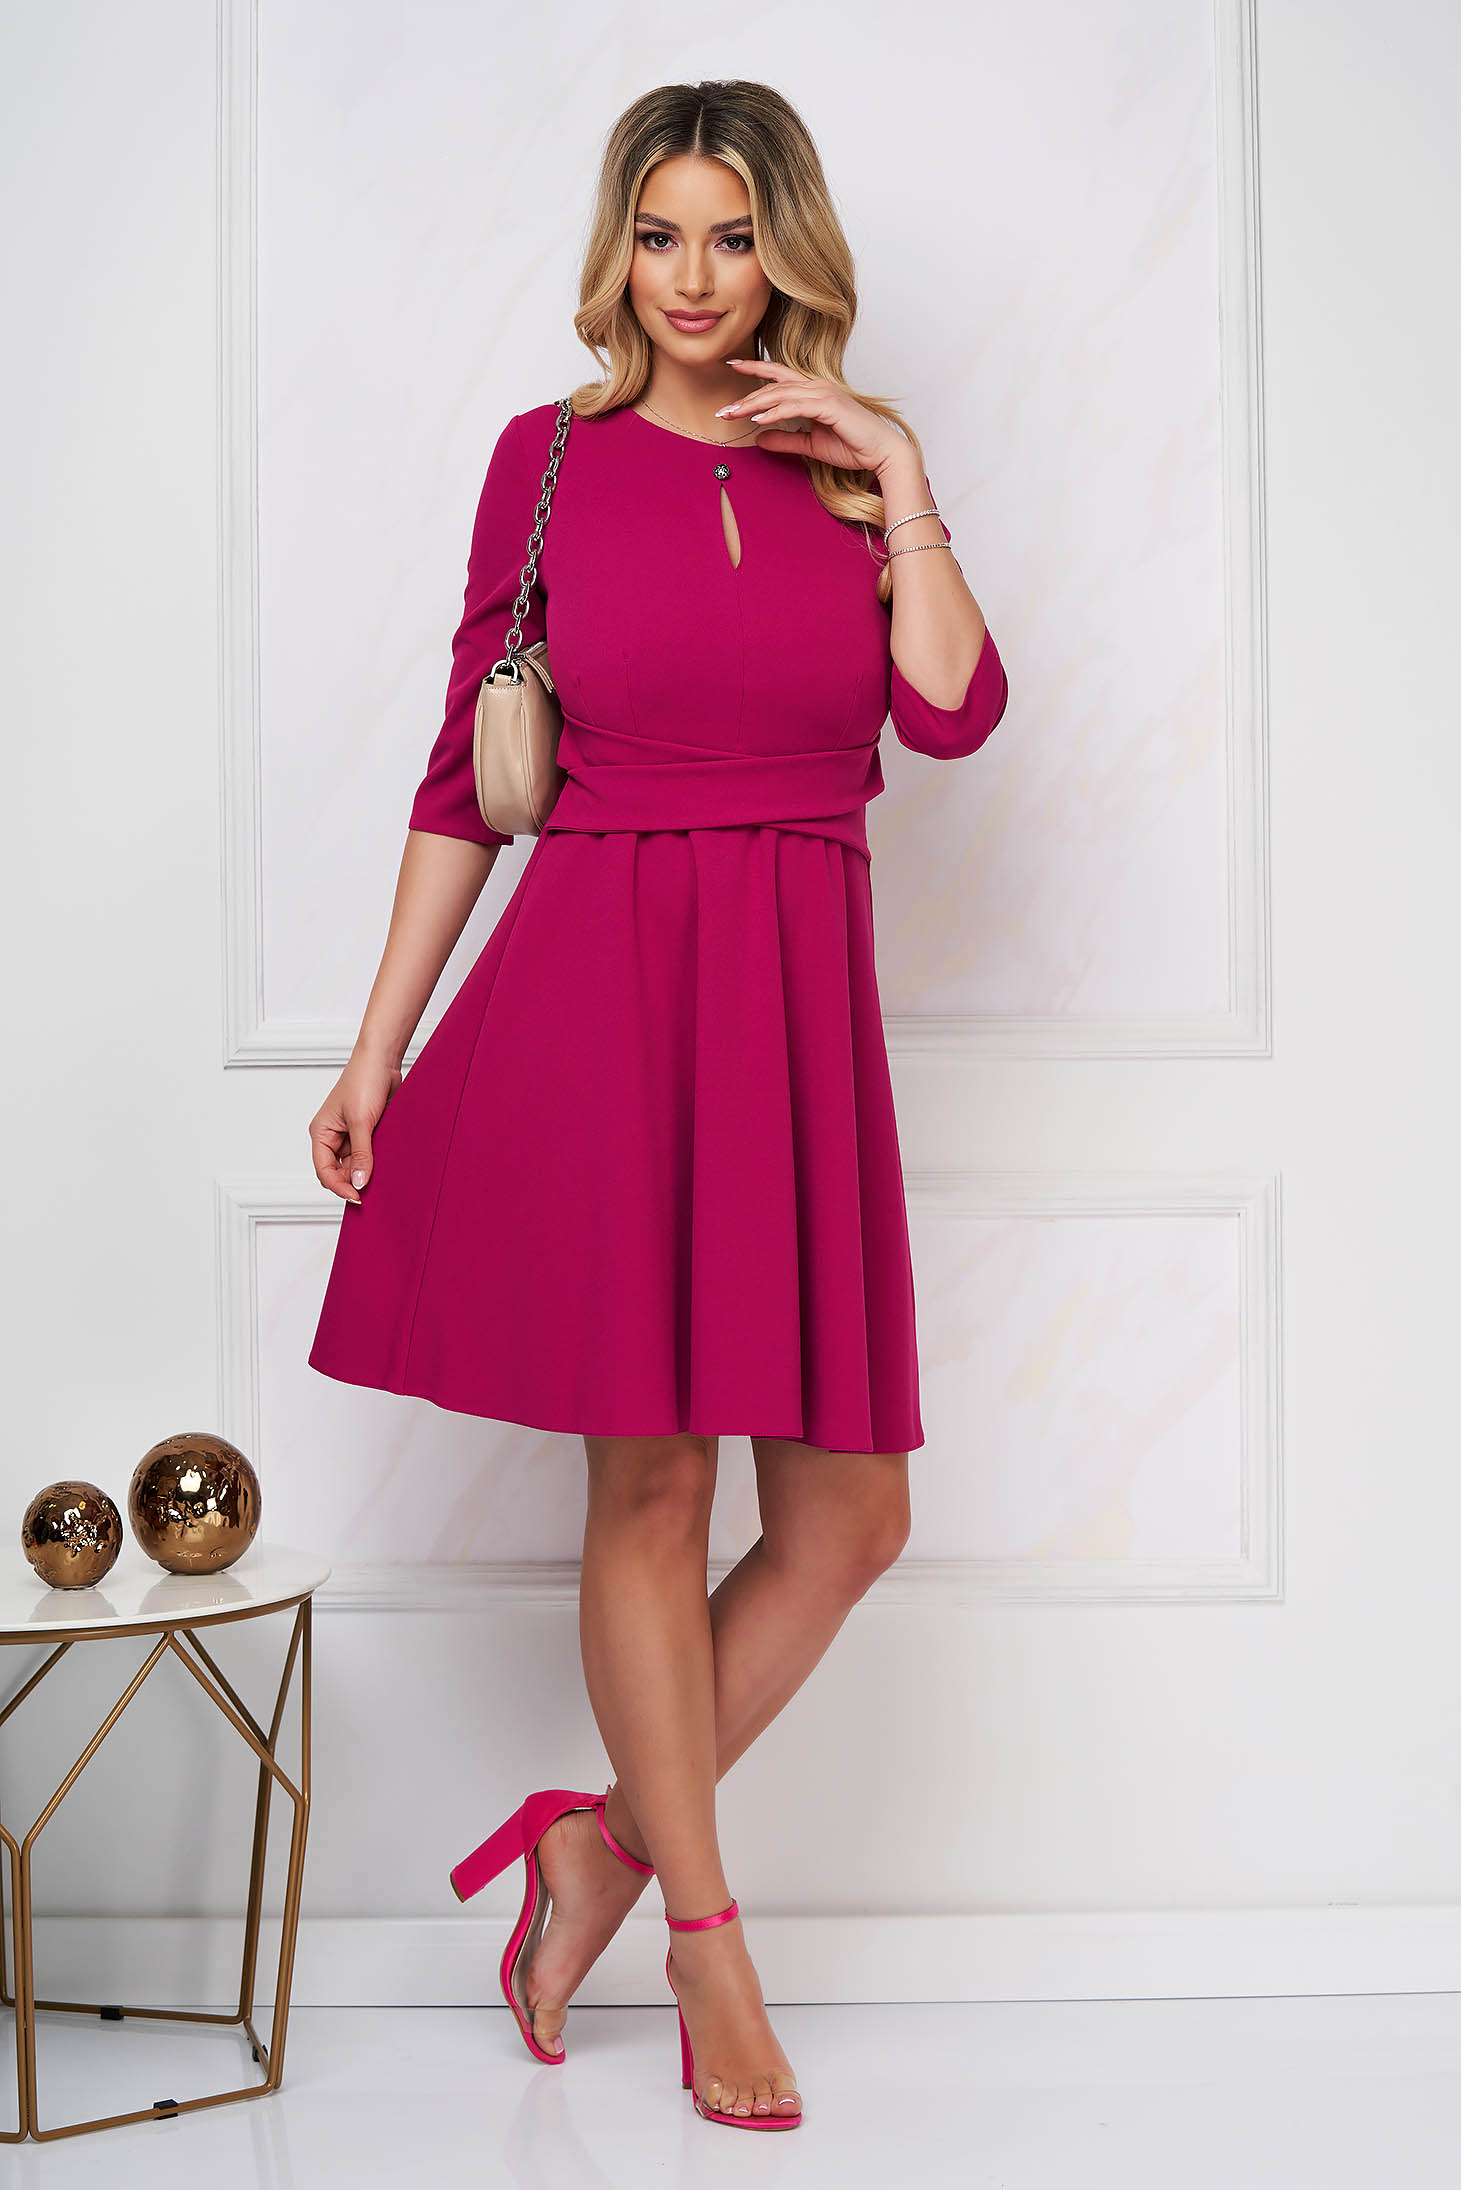 Raspberry dress short cut cloche crepe with rounded cleavage